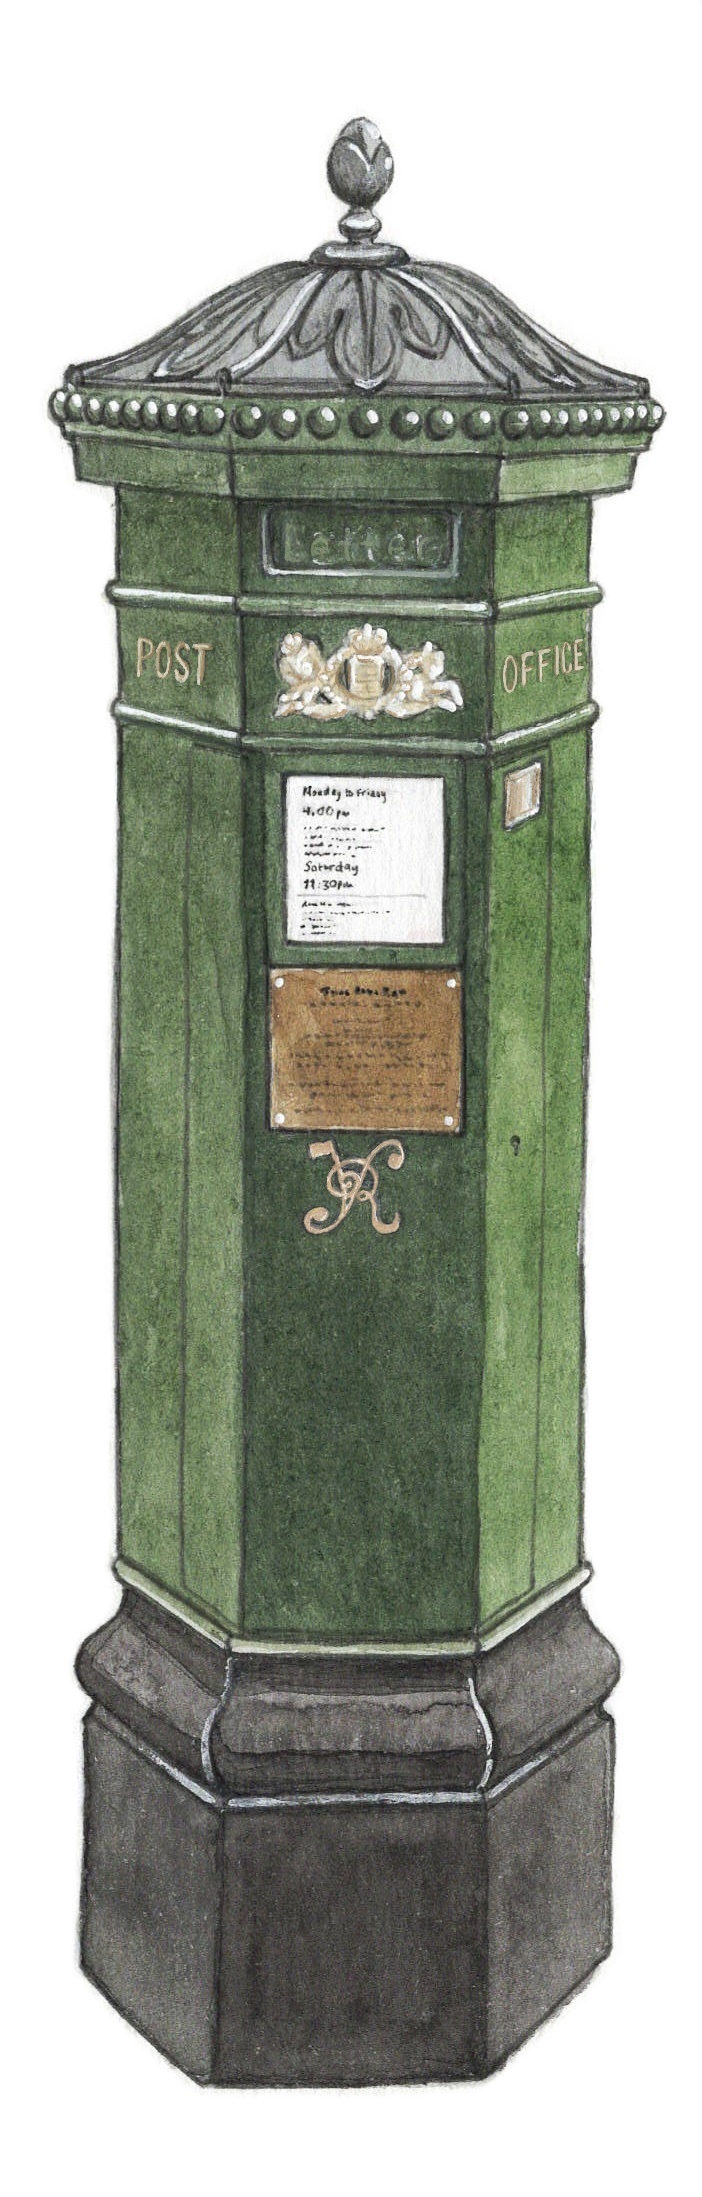 A green ornate postbox